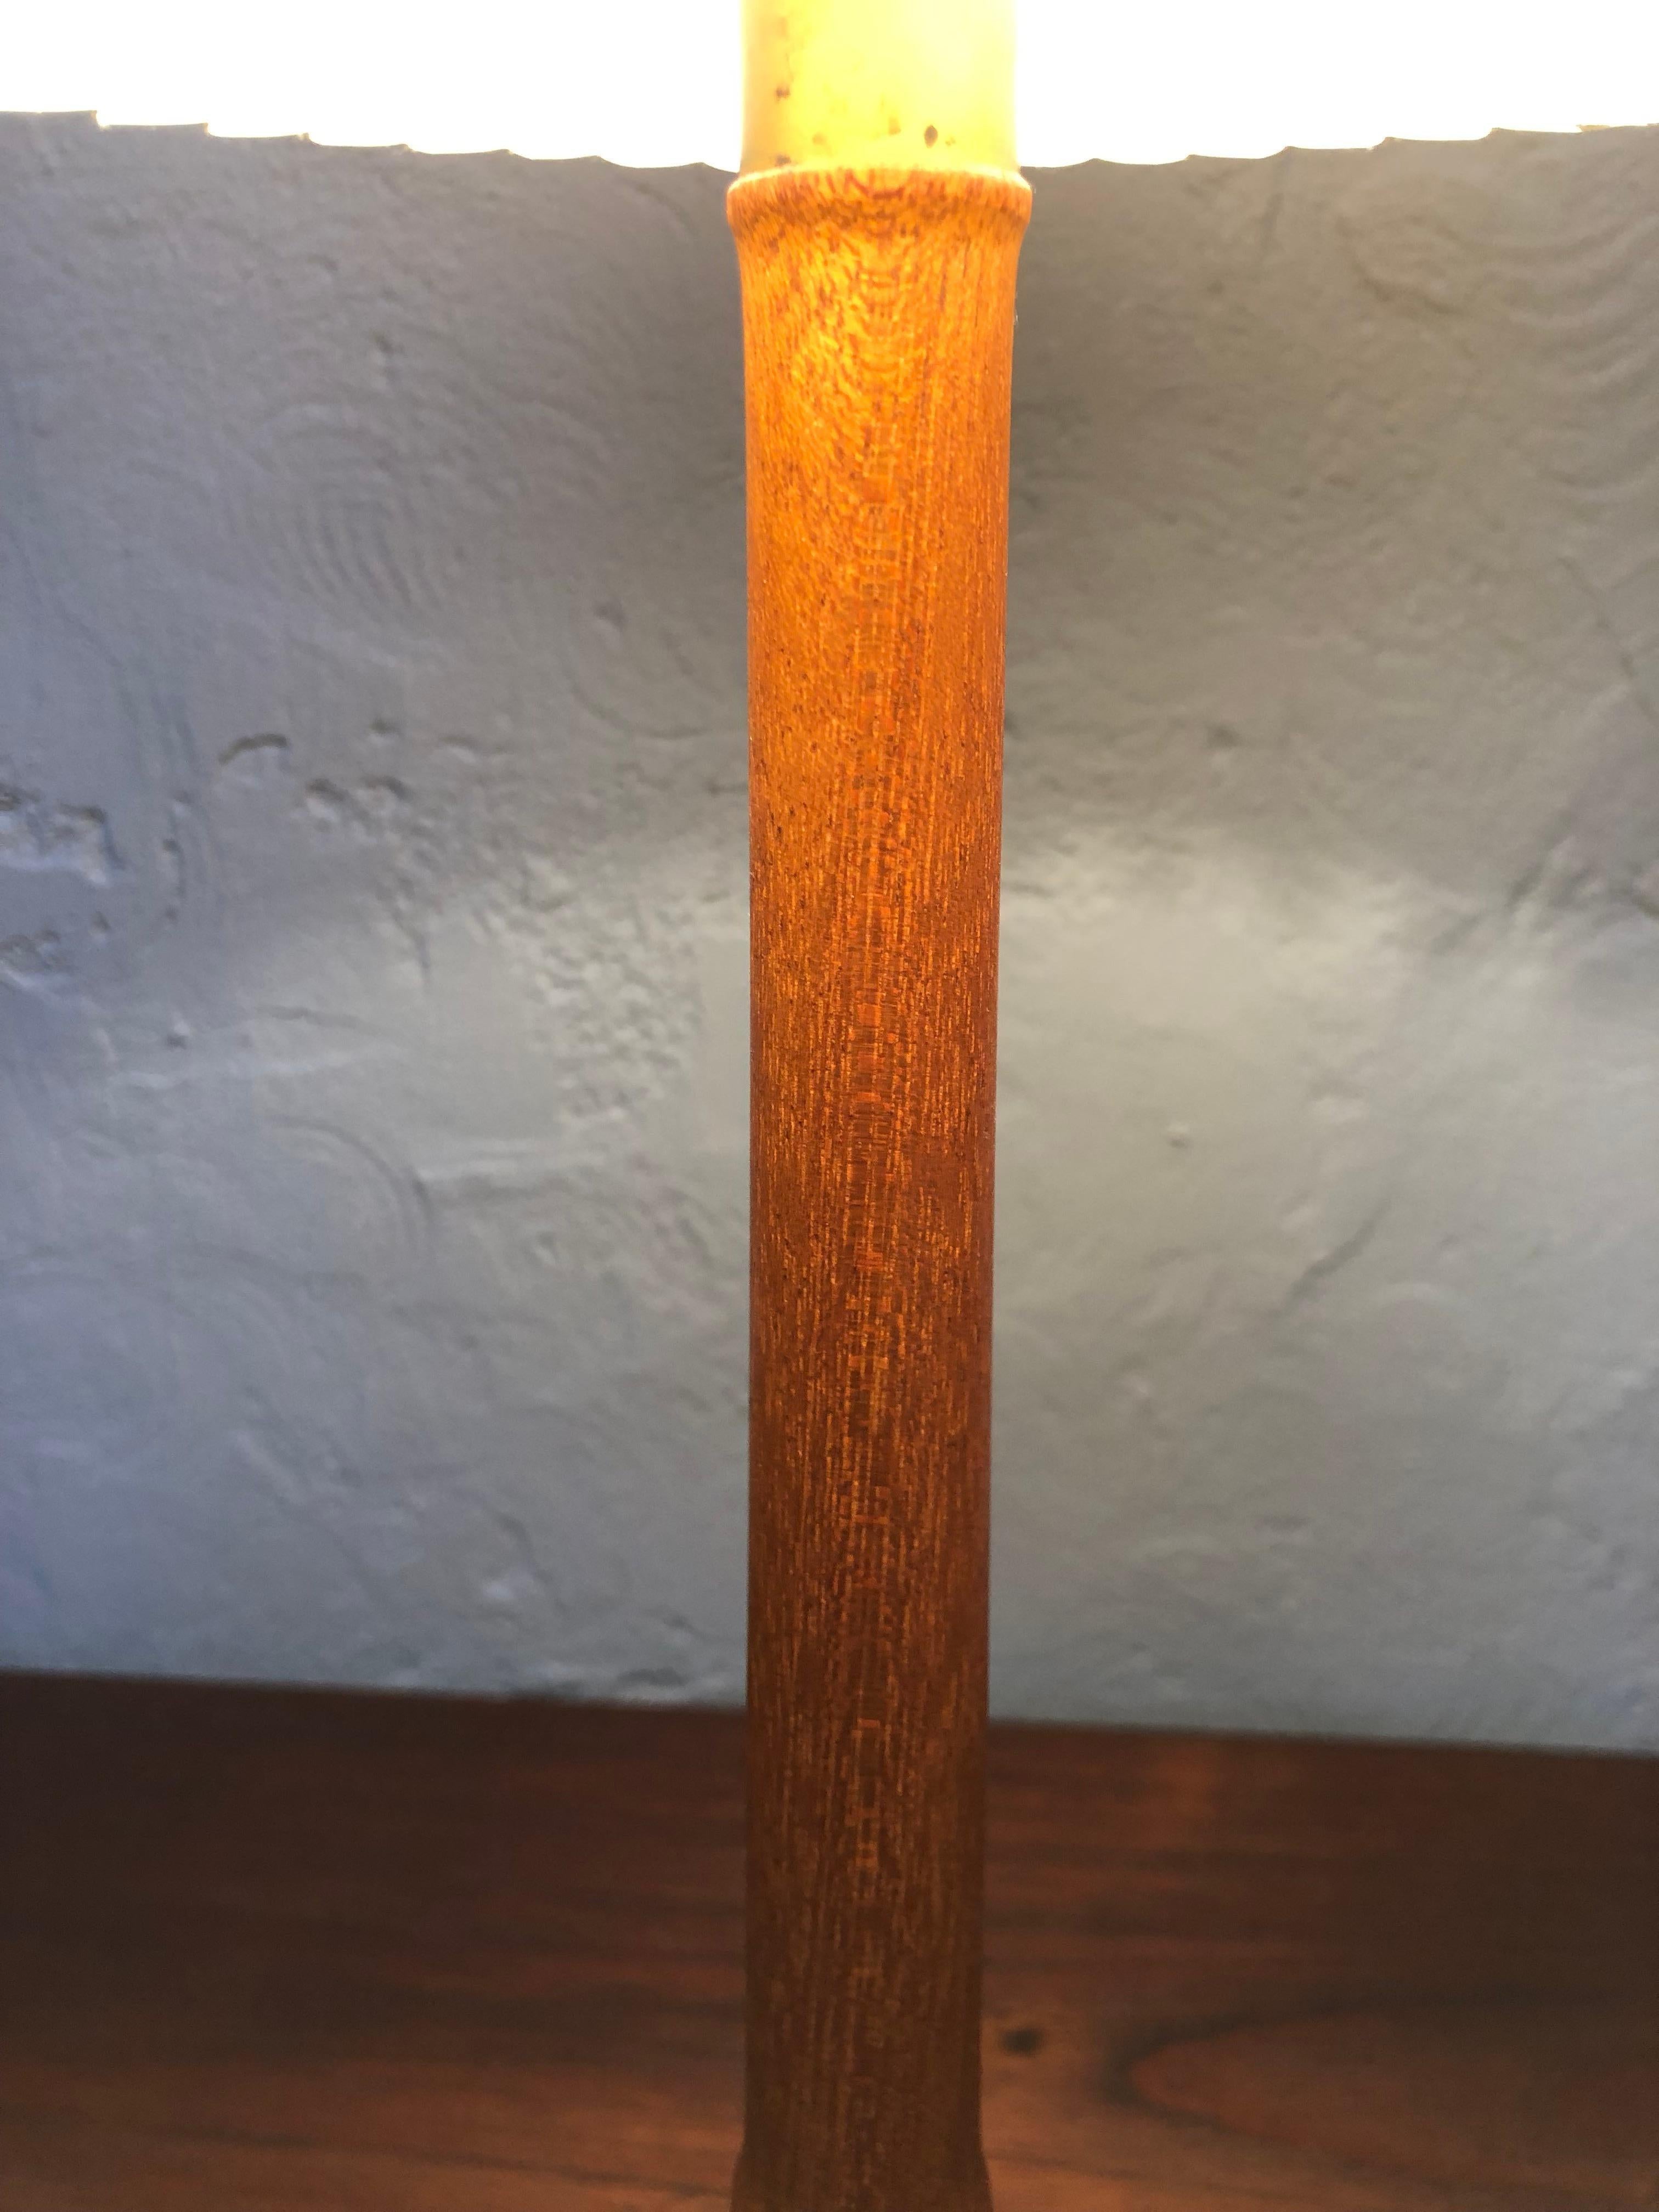 Hand-Crafted A Vintage Teak Table Lamp by Esben Klint for Le Klint from the 1940s For Sale